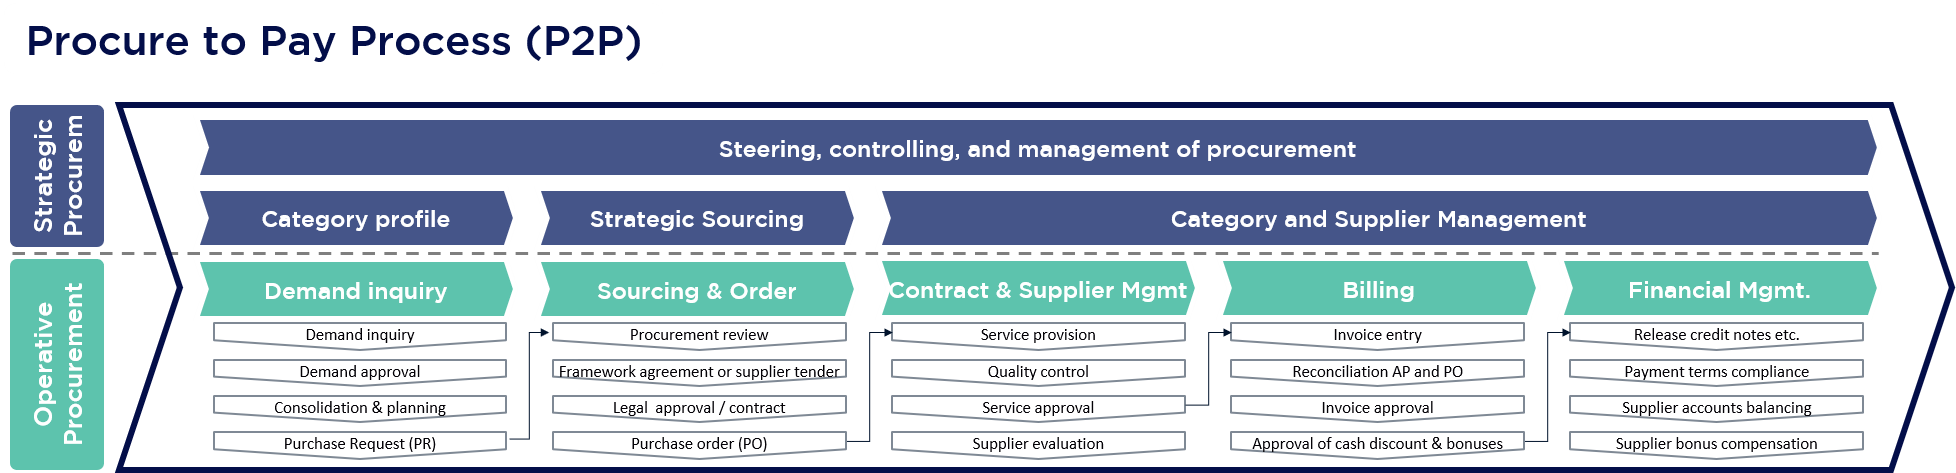 tasks in operational procurement:  the purchase to pay (P2P) process